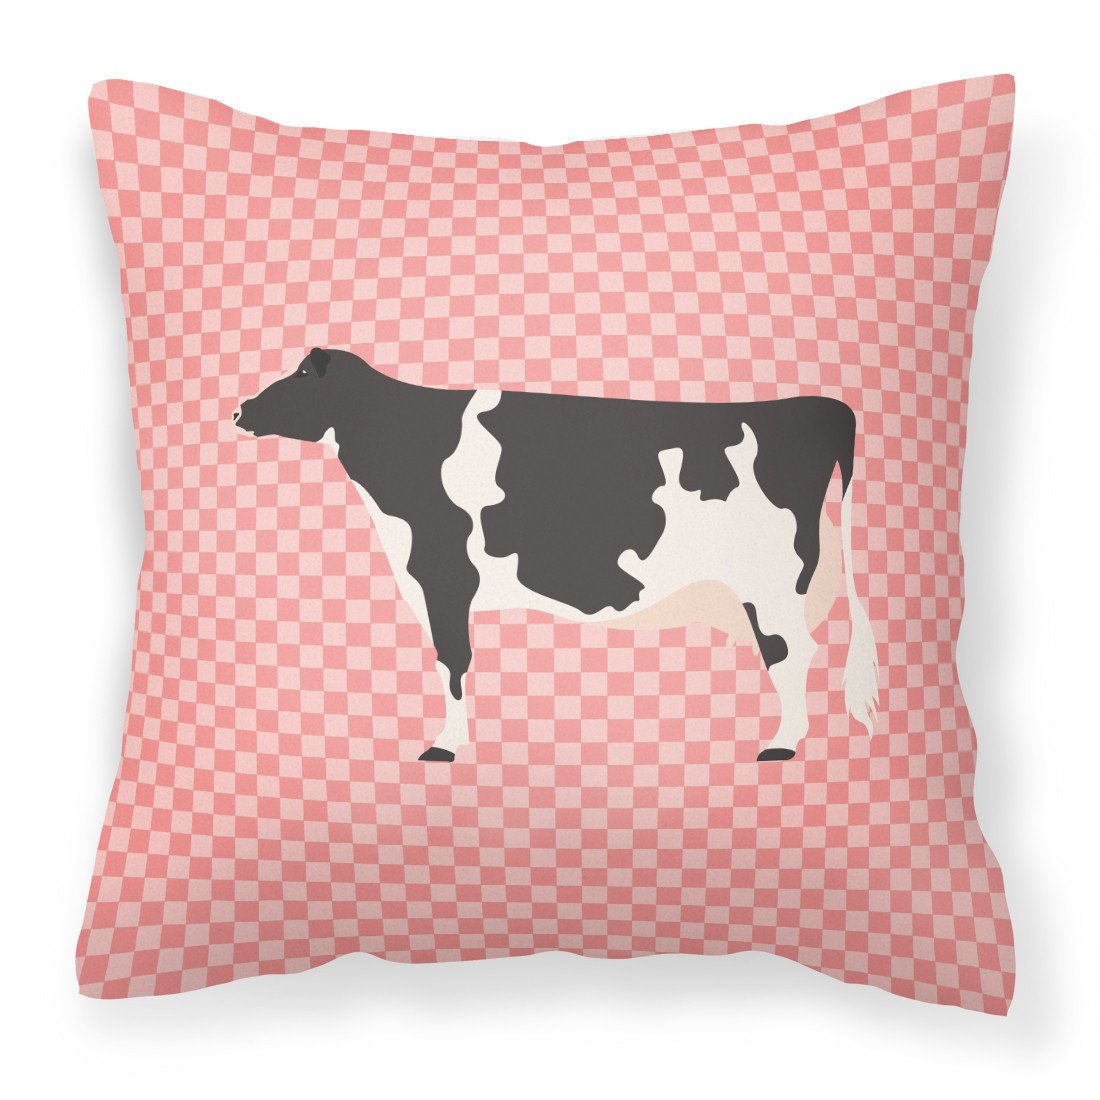 Holstein Cow Pink Check Fabric Decorative Pillow BB7822PW1818 by Caroline's Treasures